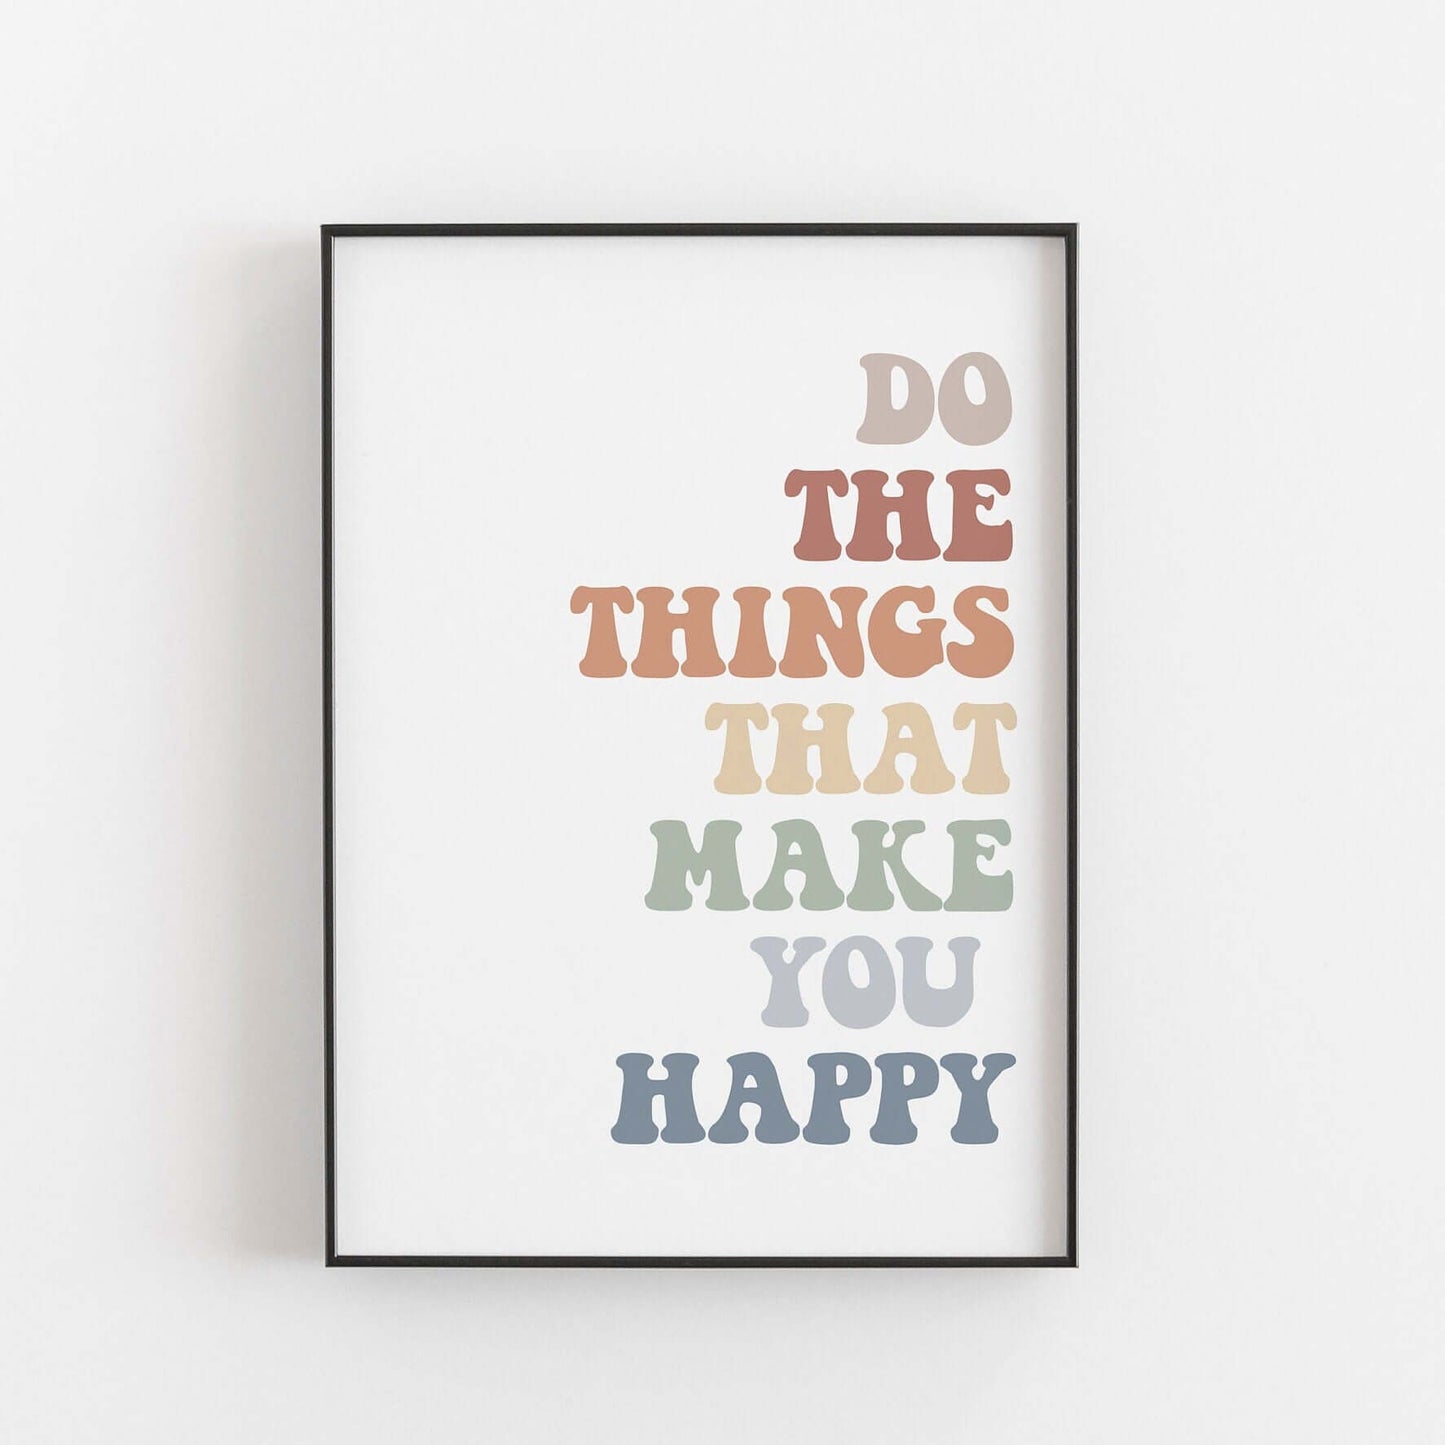 Happiness Quote Print, Do The Things That Make You Happy, Home Decor, Kids Wall Decor, Nursery Prints, Positive Quote, Motivational Quote,